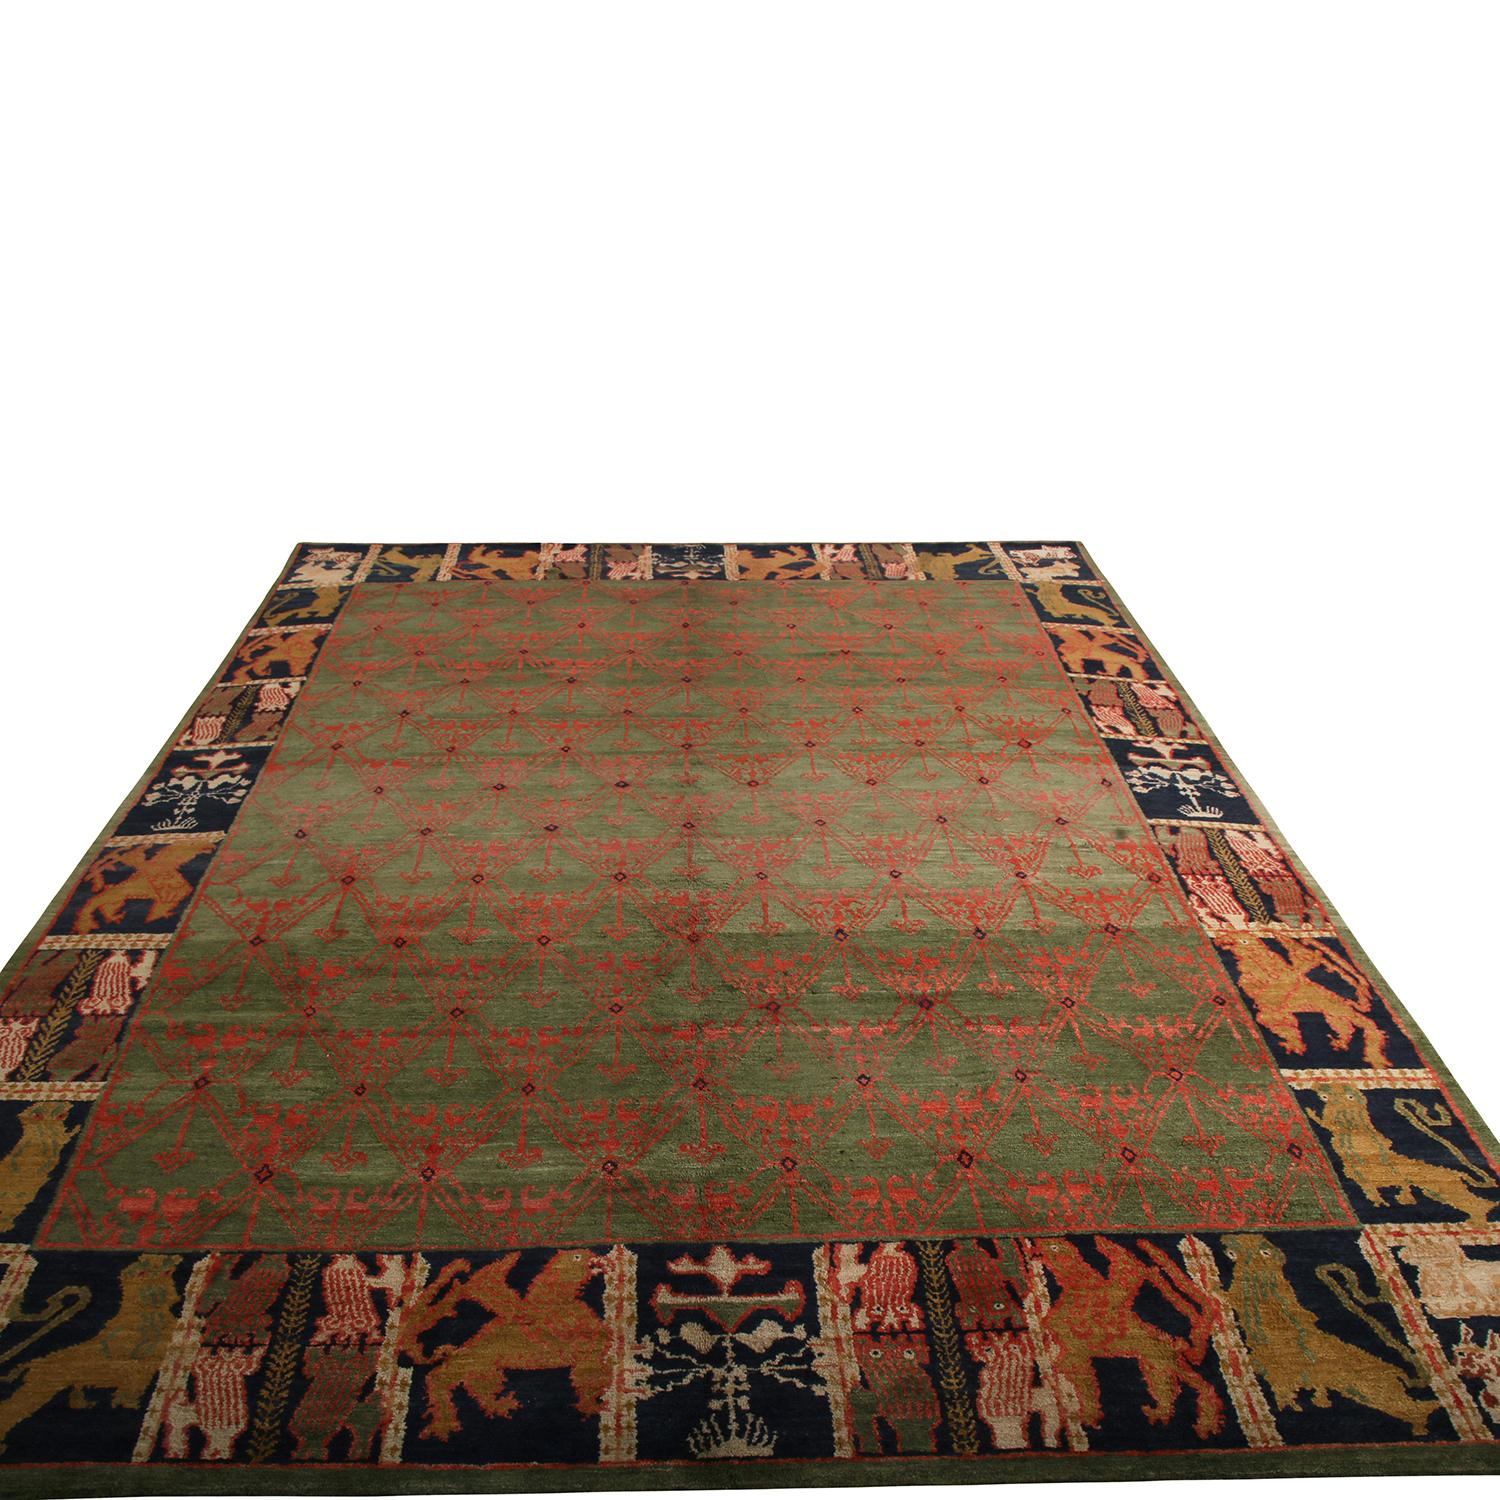 Inspired by Spanish colonial design, Rug & Kilim presents this 9 x11 piece from its European collection featuring the celebrated “Cortez” design of classic, regal sensibilities prevailing on the graph in rich florals on field and pictorials on the